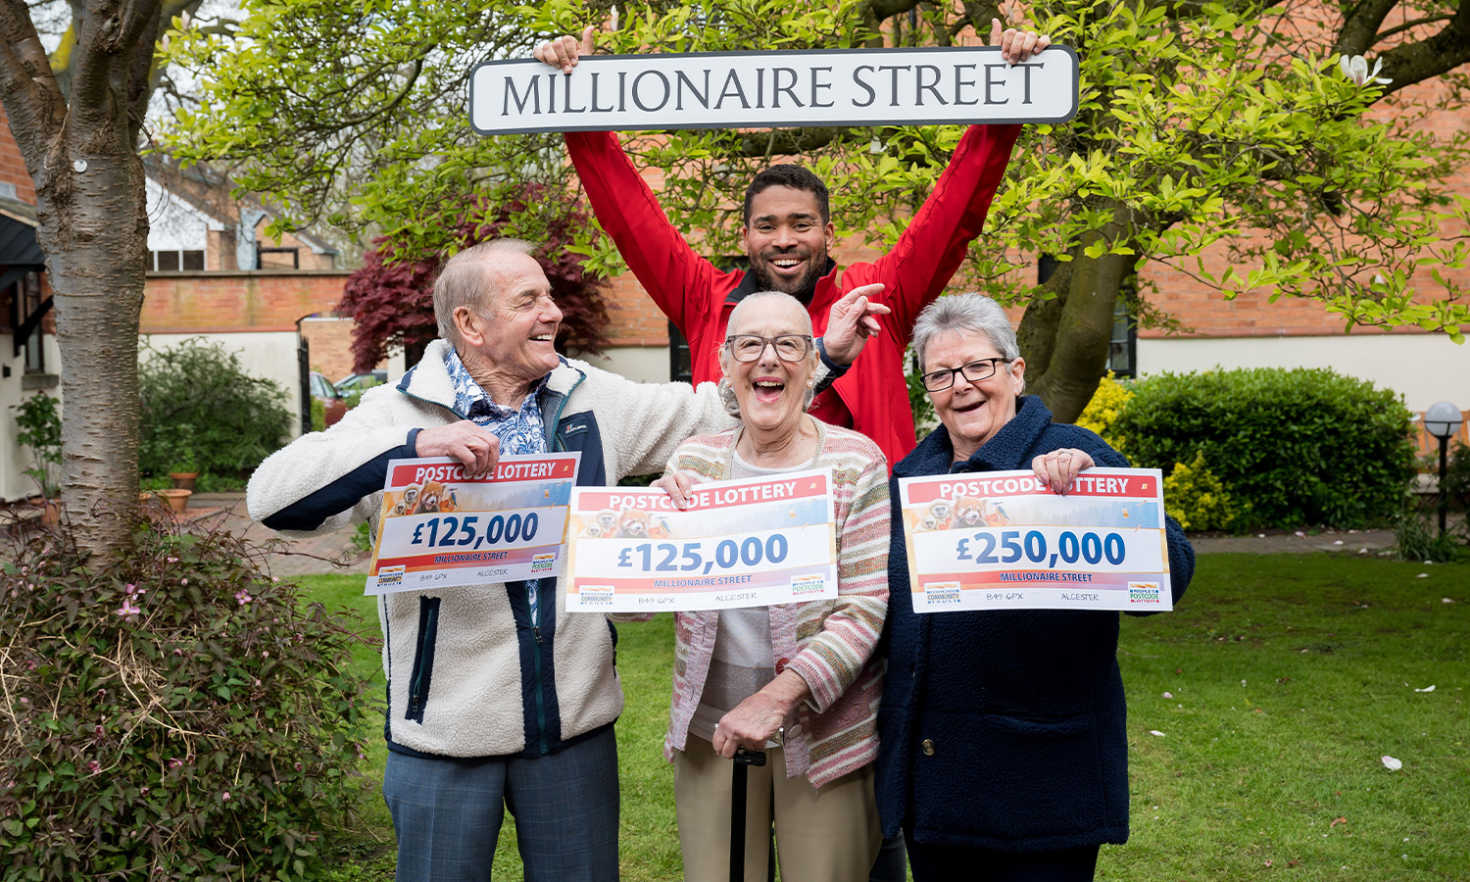 Today's Millionaire Street prizes have landed in Alcester!